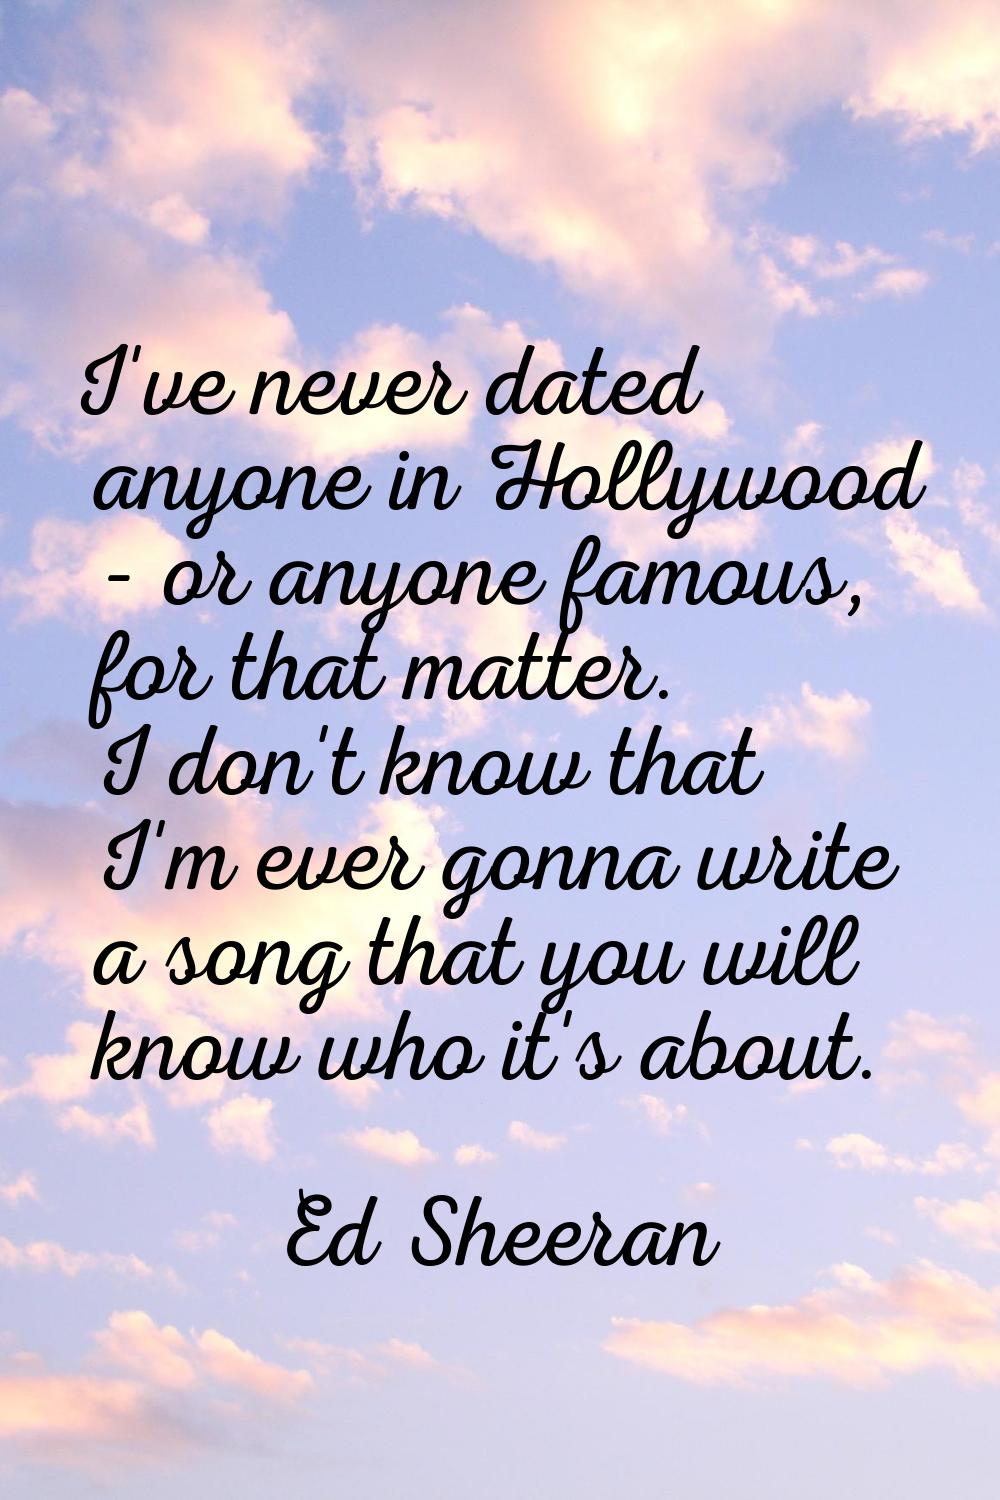 I've never dated anyone in Hollywood - or anyone famous, for that matter. I don't know that I'm eve